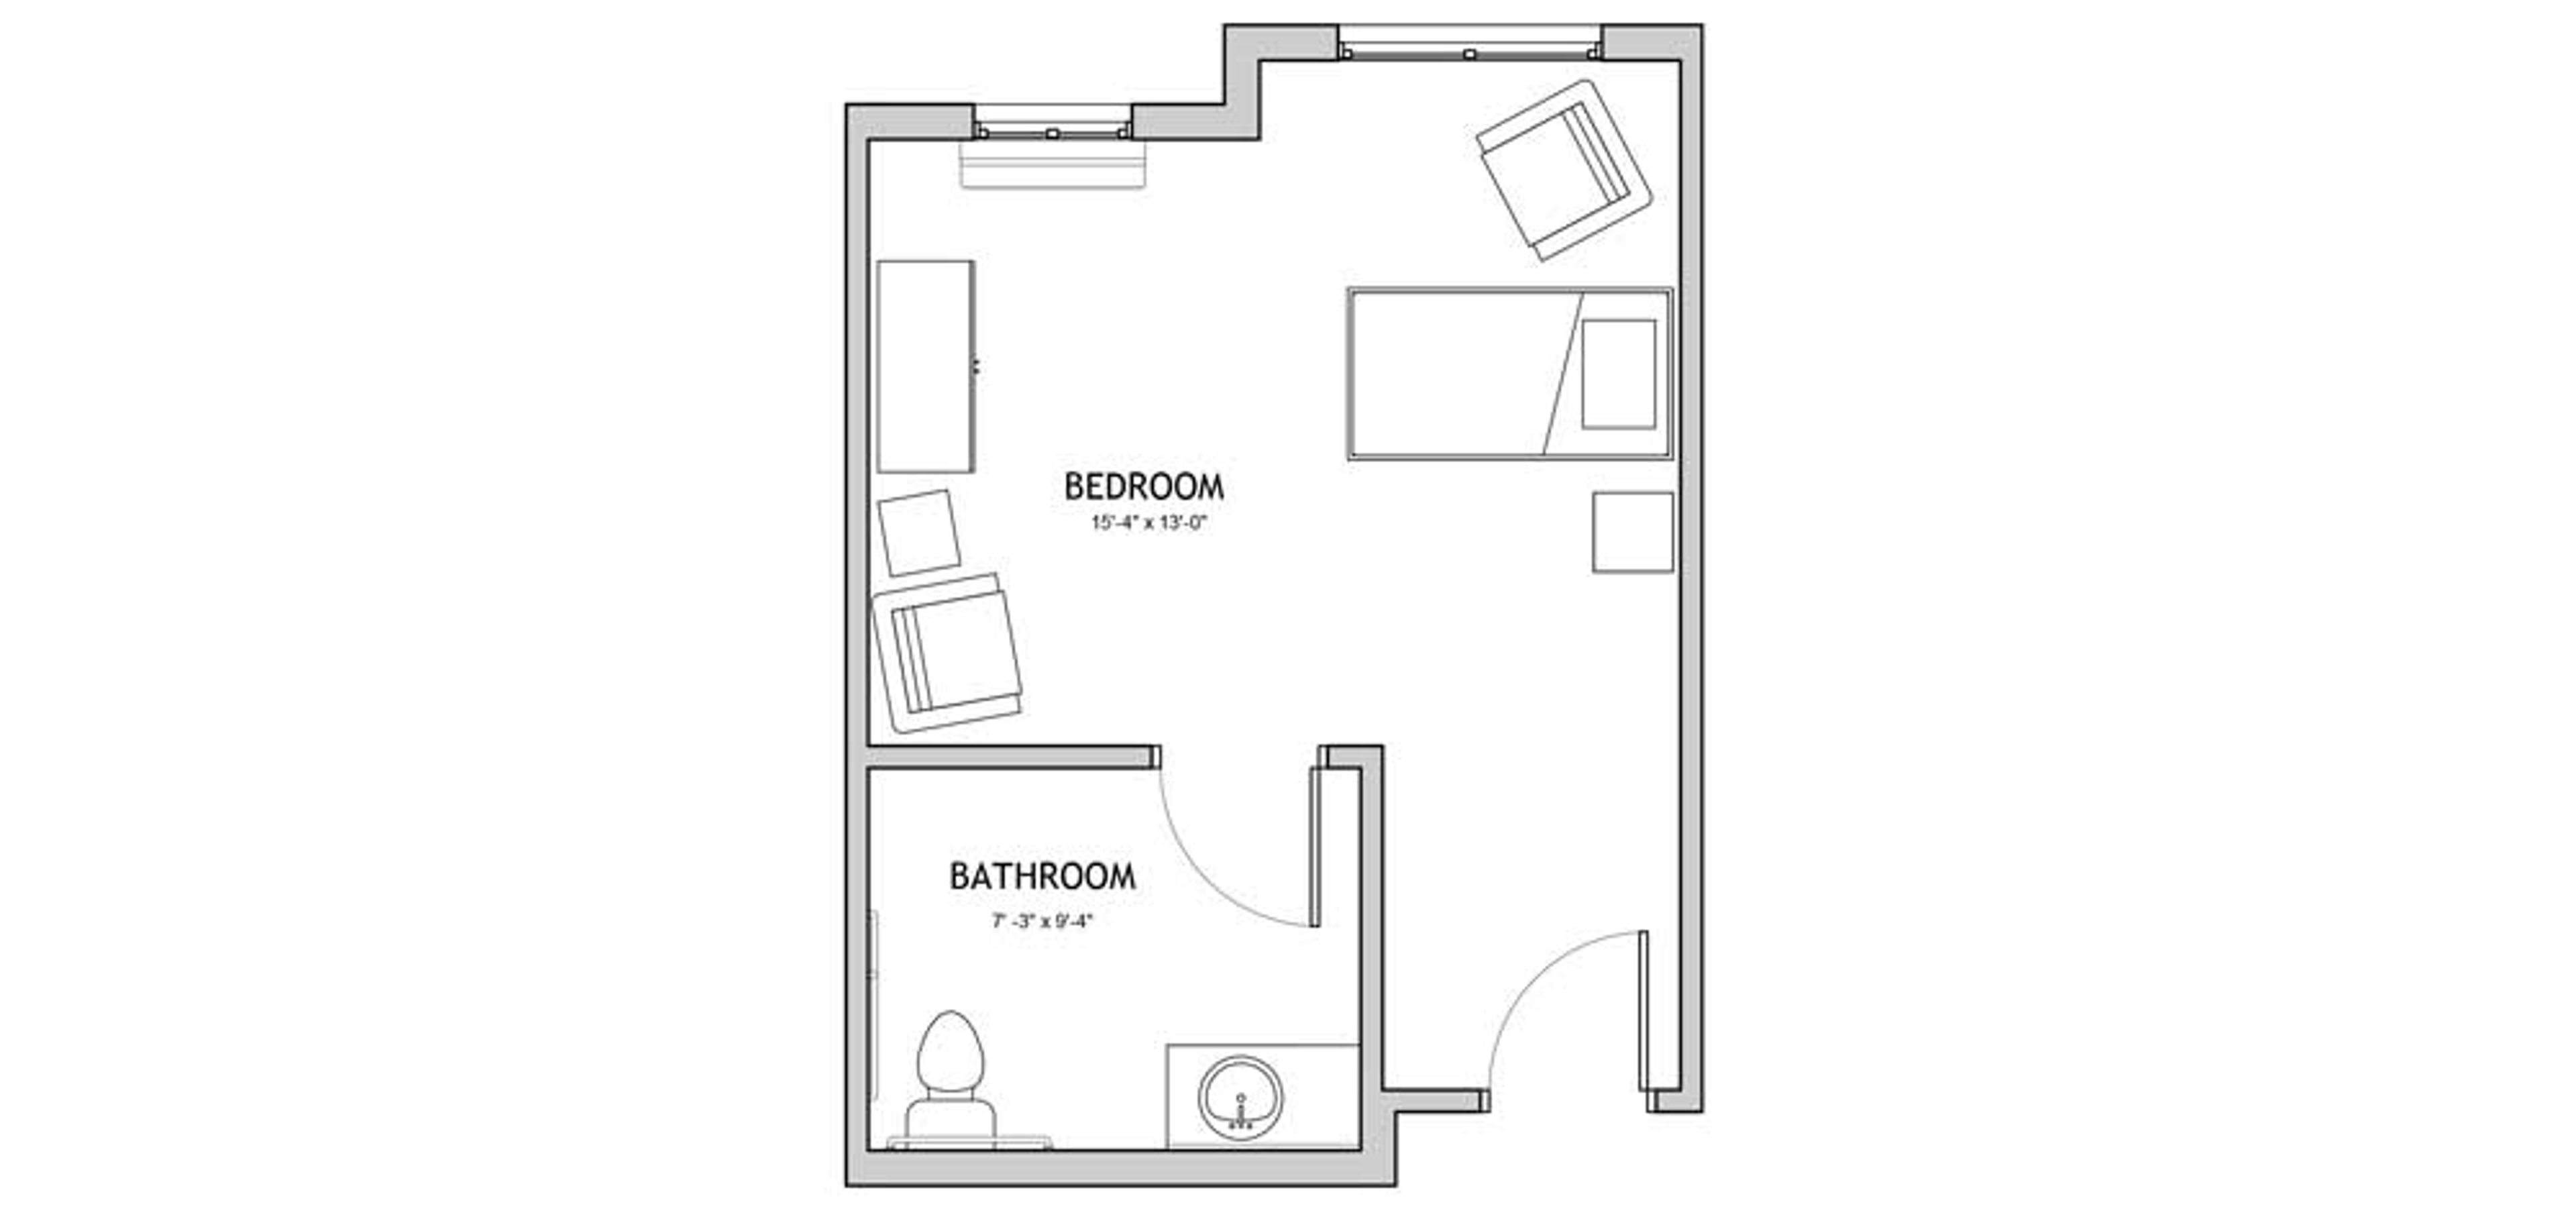 Floorplan - The Auberge at Plano - 1 bed, 1 bath, 329 sq. ft. Memory Care